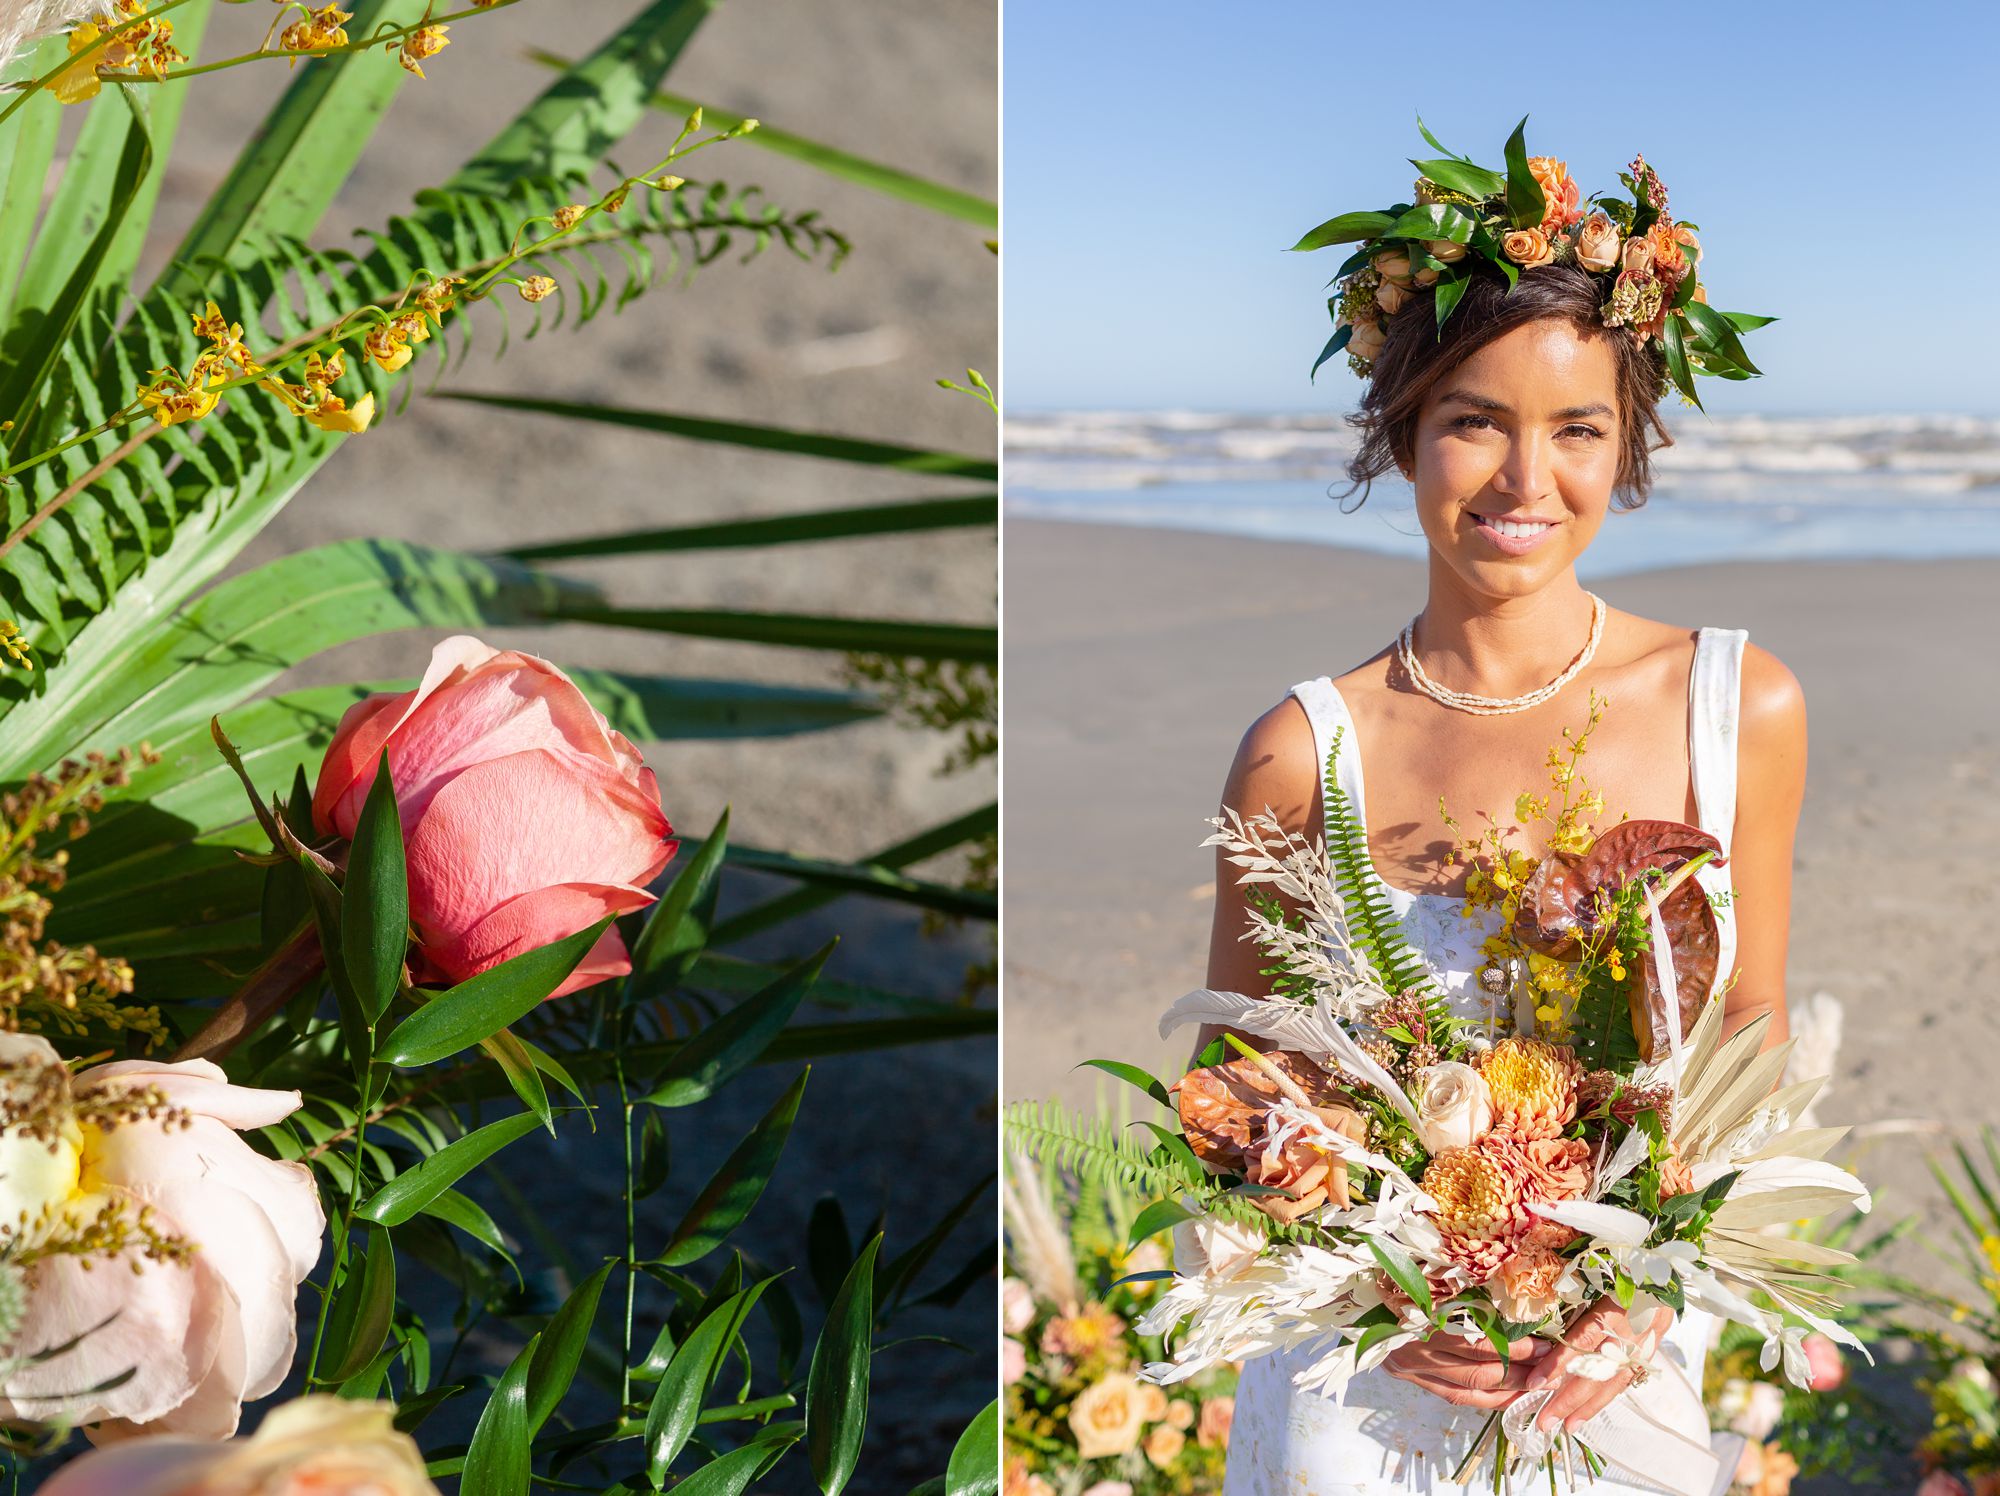 A bride wears a flower crown with orange roses and greenery while holding a tropical boho bouquet.